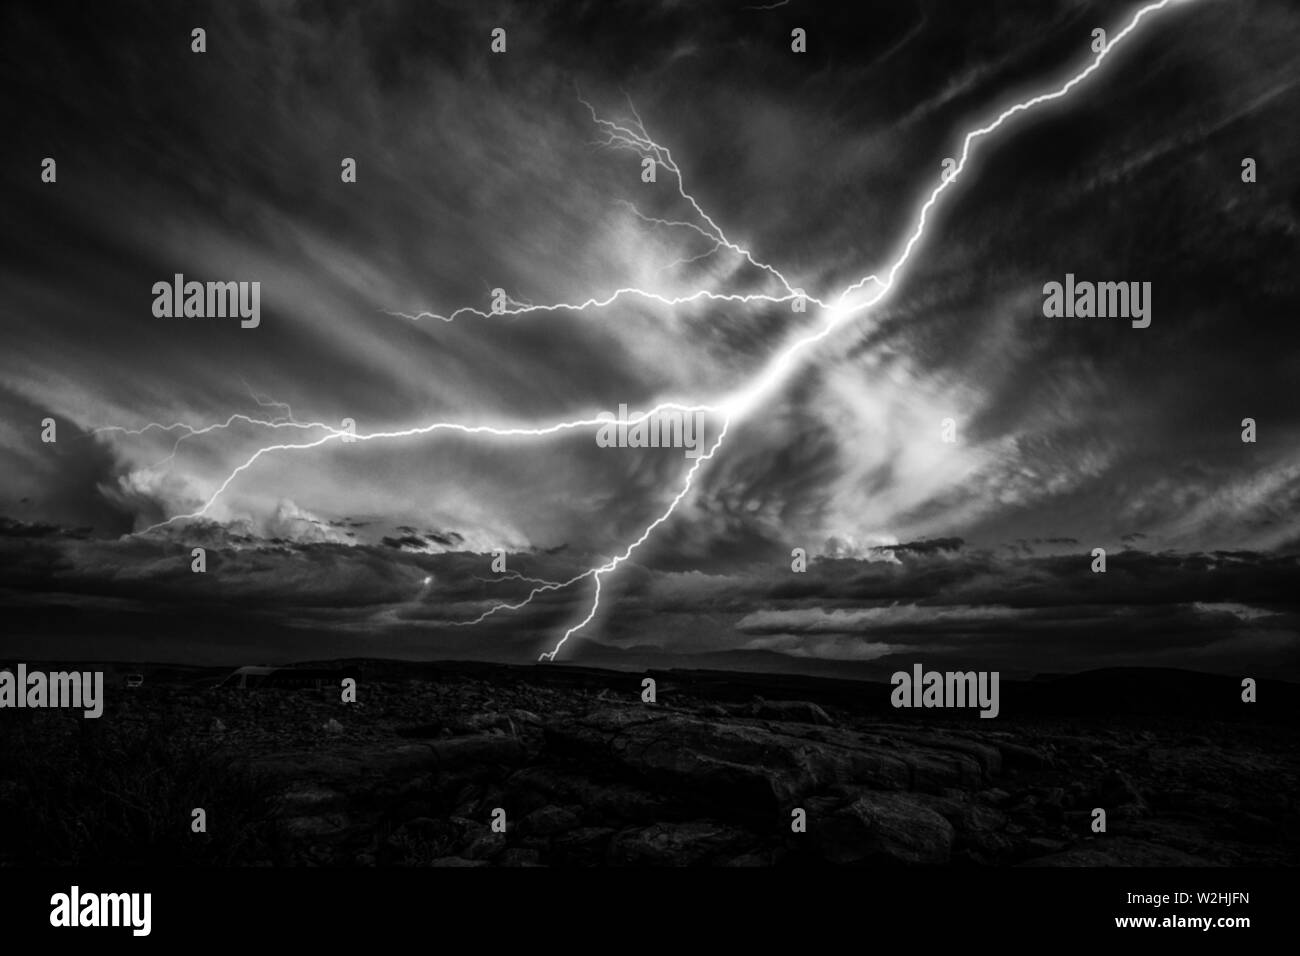 Lightnings striking towards the ground. Lightnings during a thunderstorm at night. Black and white image Stock Photo